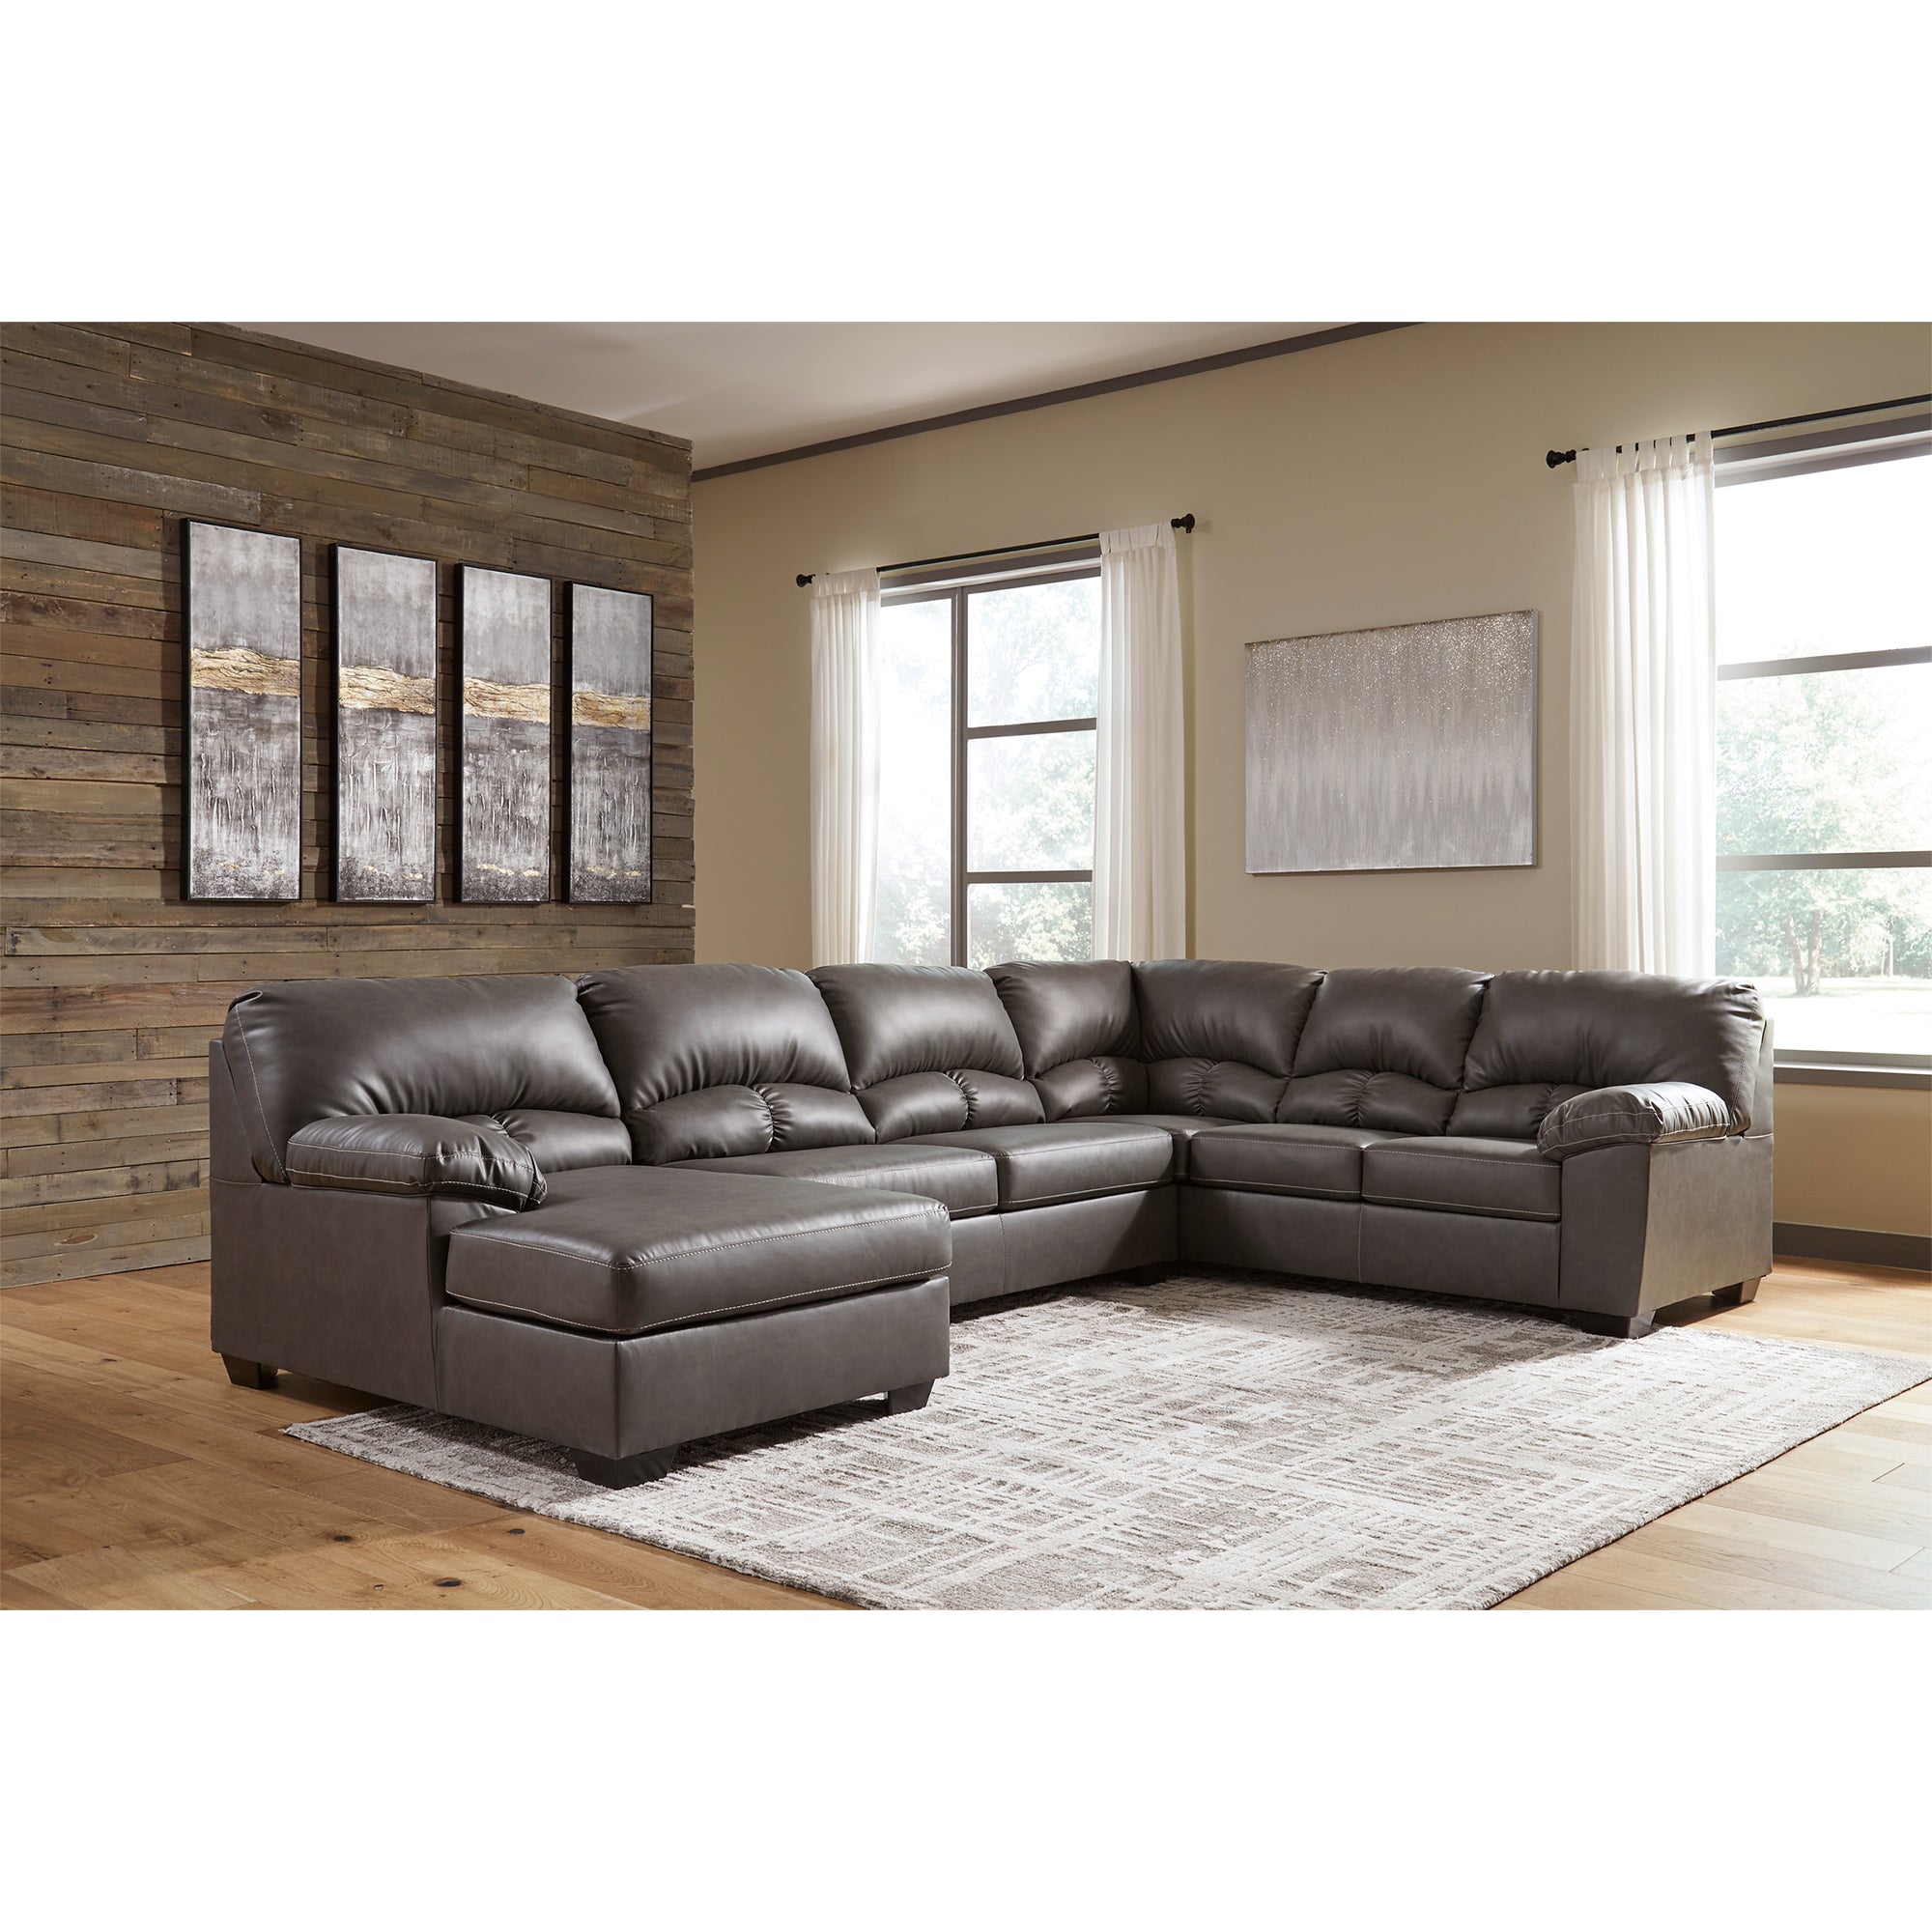 Aberton 3-Piece Sectional with Chaise in Gray Color